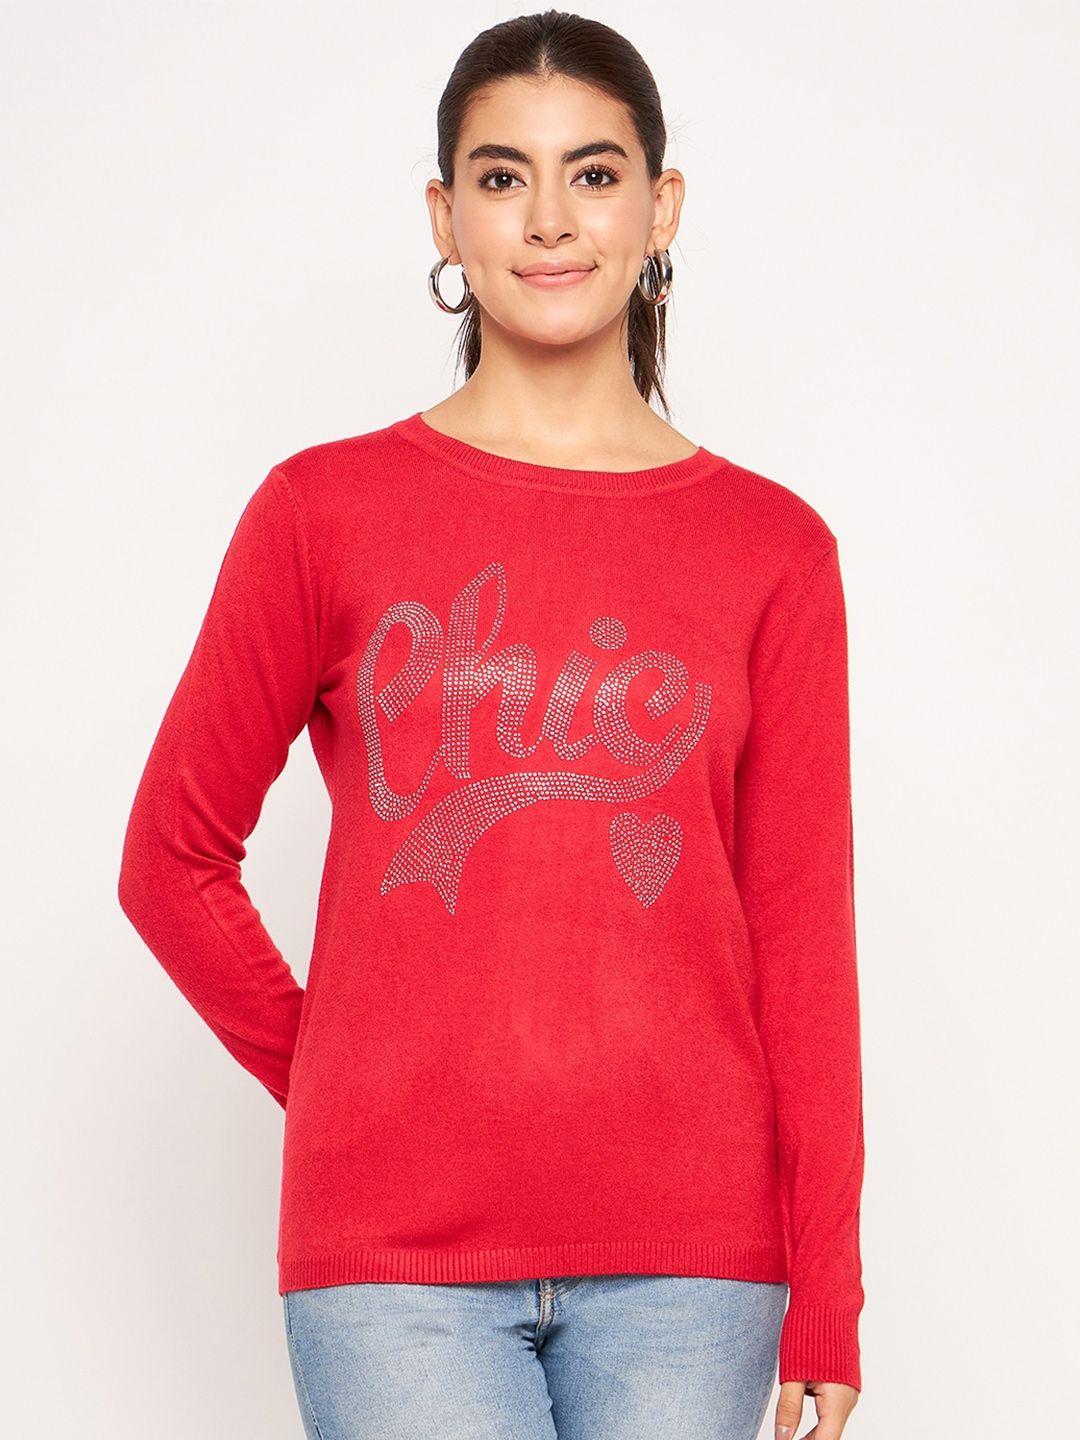 camey-typography-printed-round-neck-long-sleeves-embellished-wool-pullover-sweater